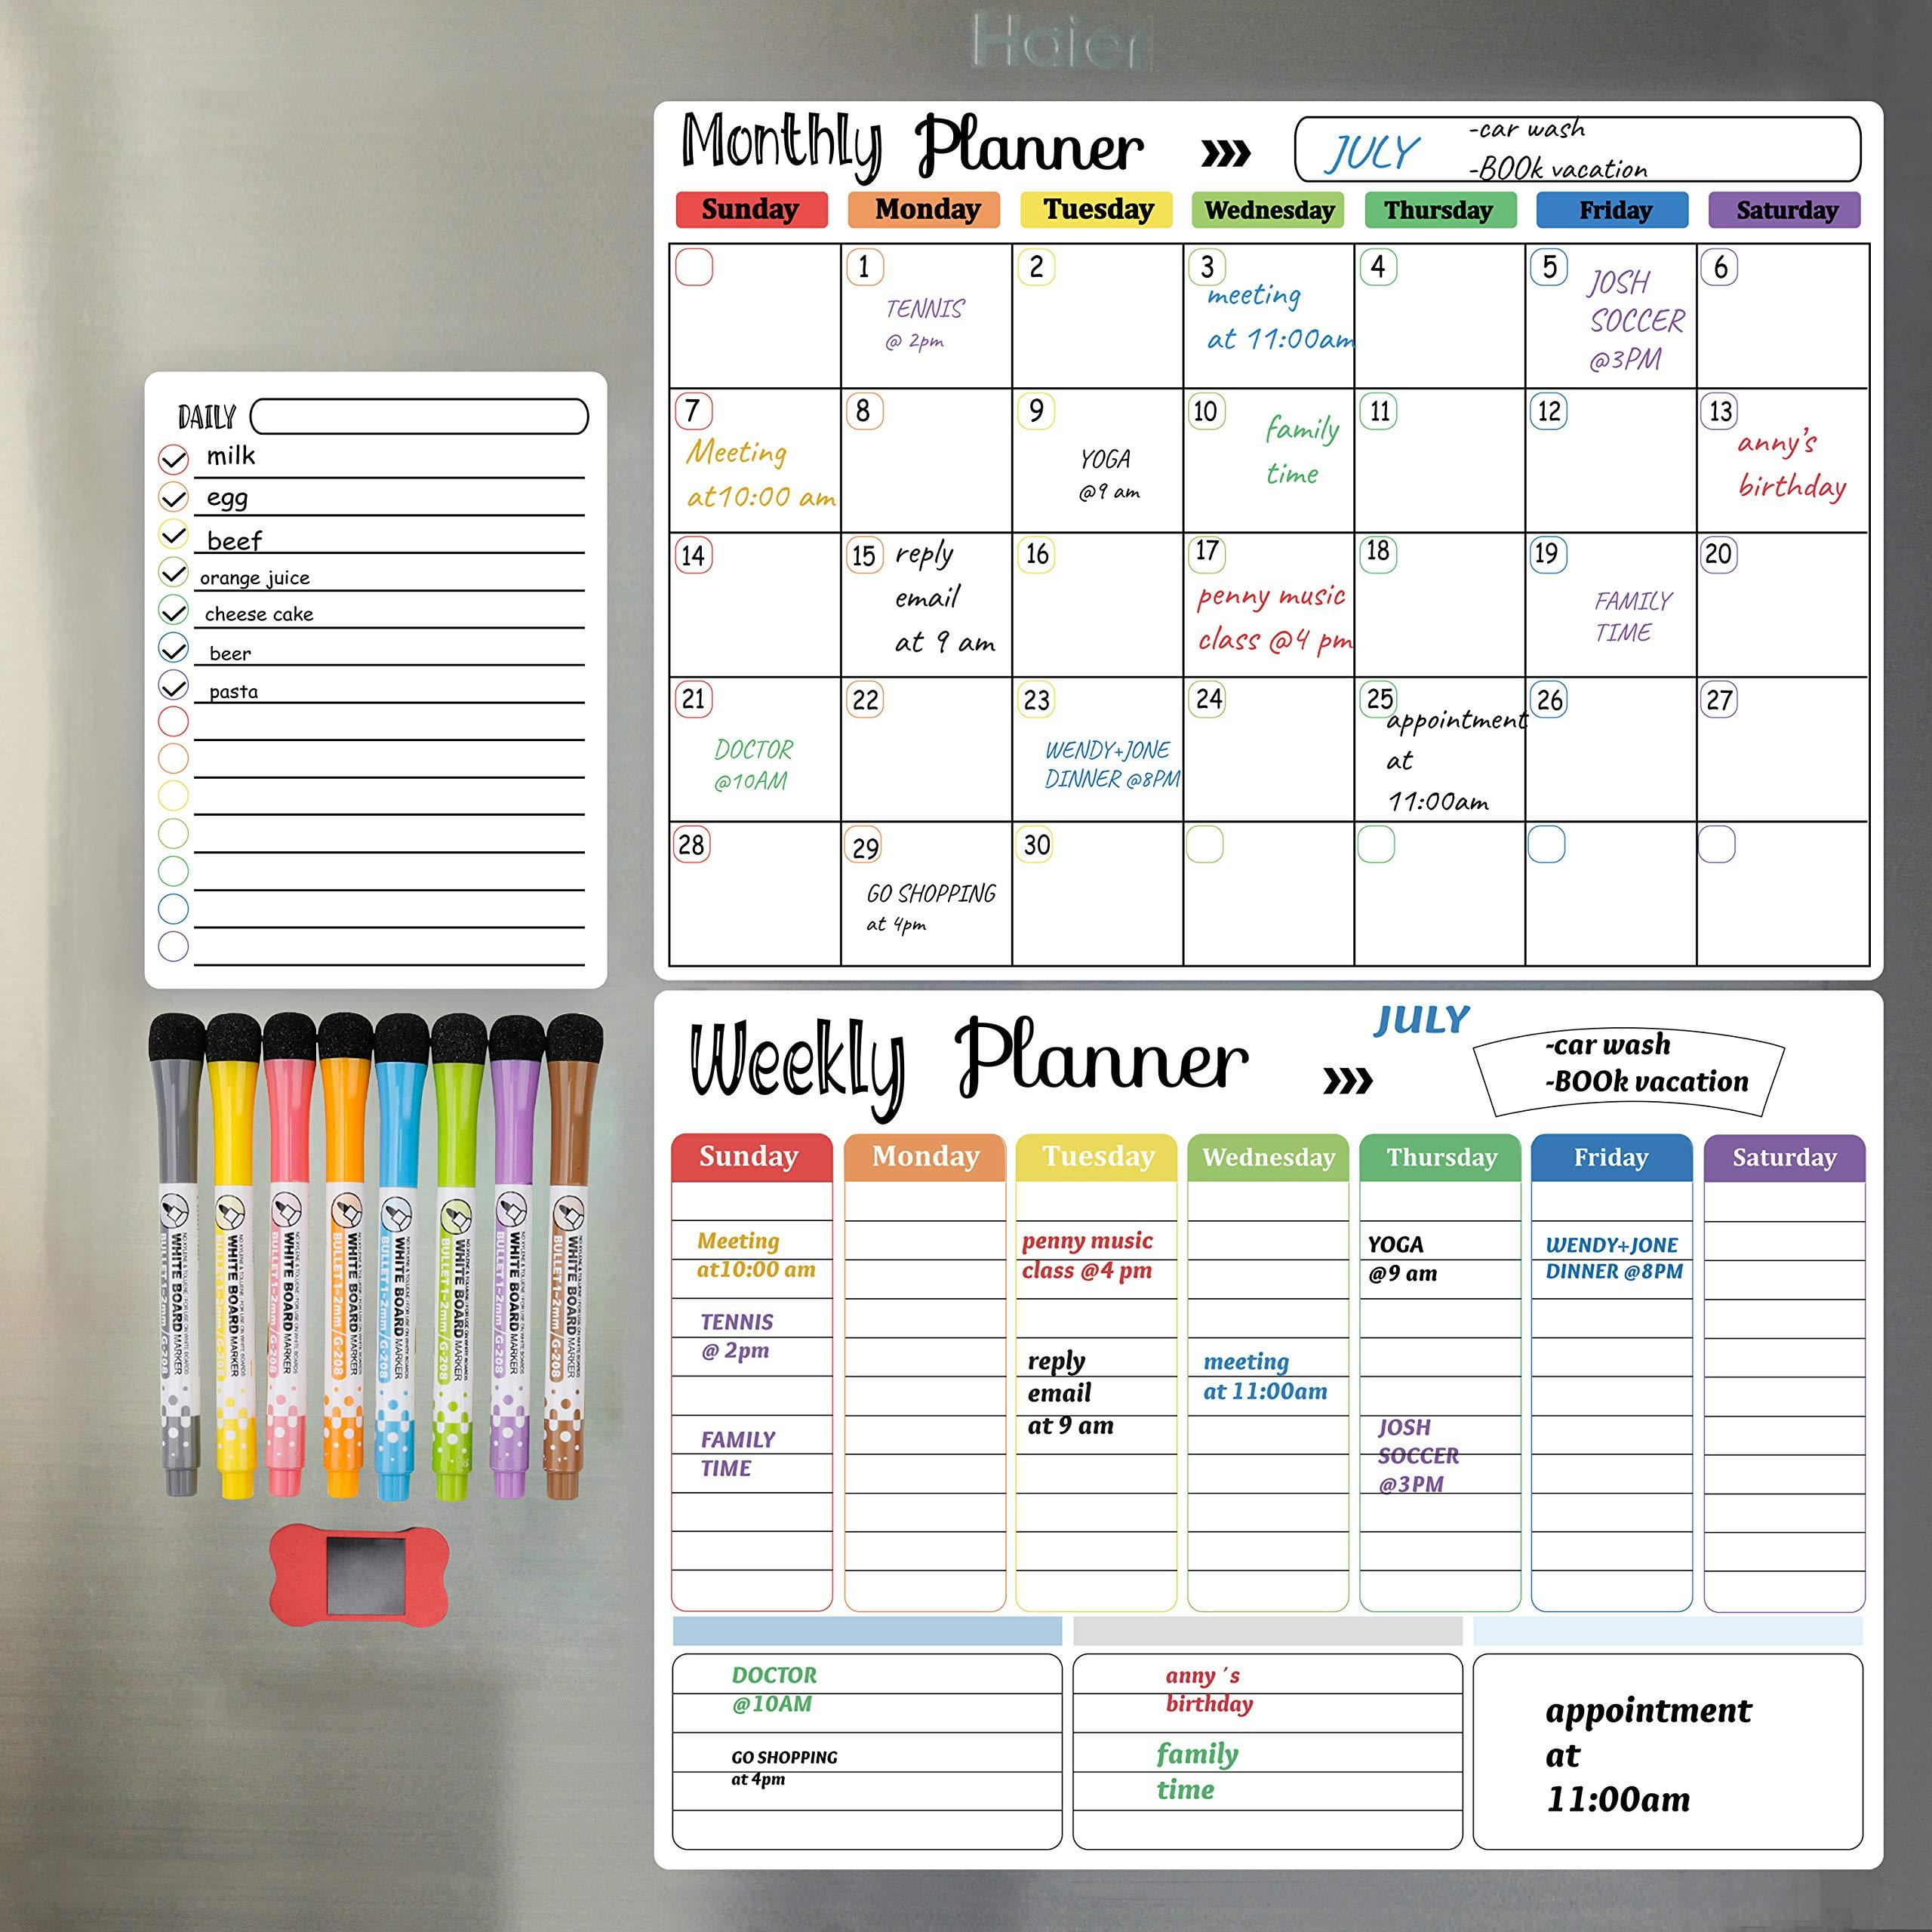 Office Magnetic Dry Erase Weekly Planner Board For Refrigerator By Amsenc For Family Weekly Whiteboard Calendar Stain Resistant Technology Home Fridge Use 4 Markers 